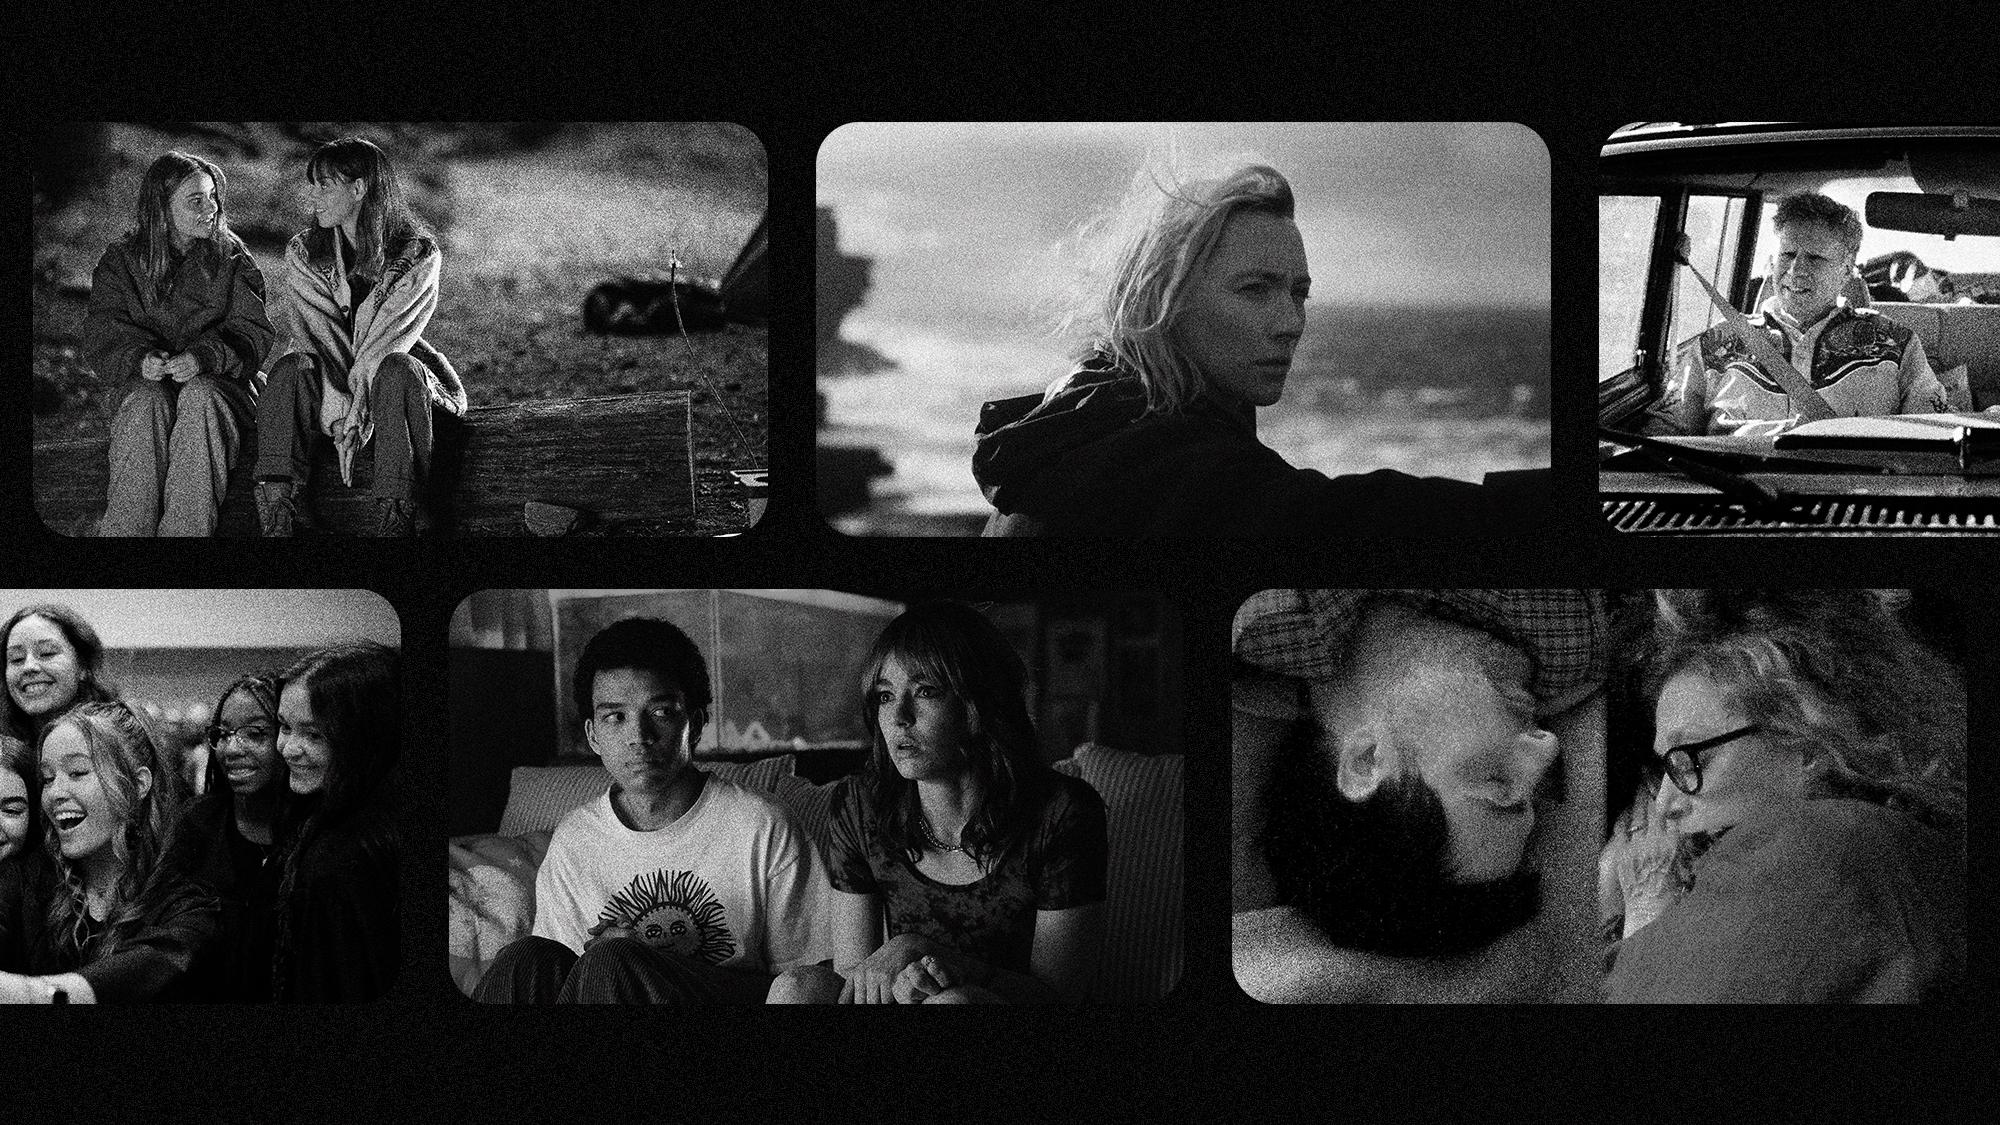 A collage of black-and-white images from Sundance movies